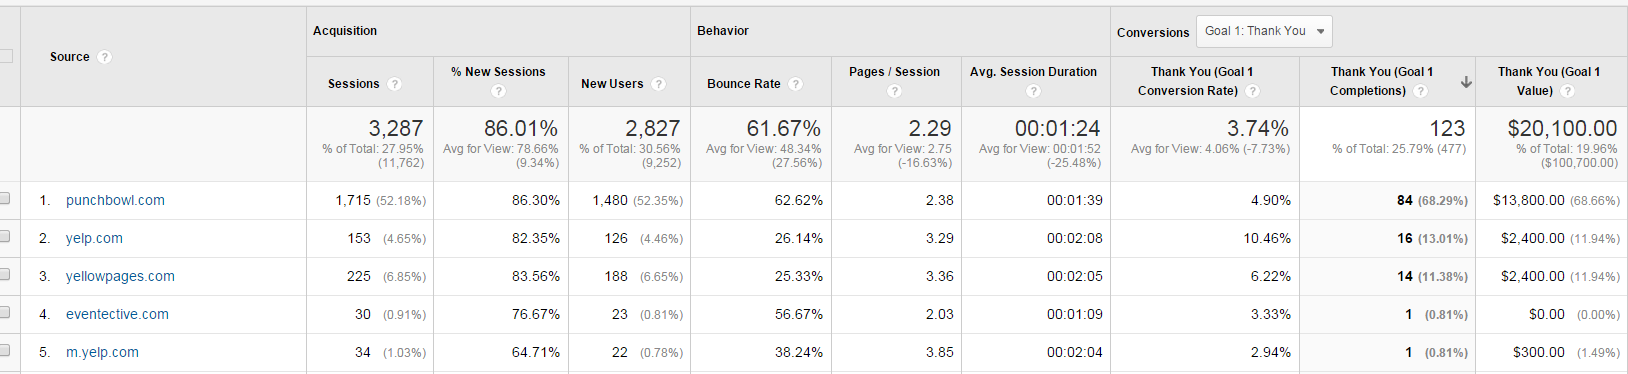 Referral Data with Conversions